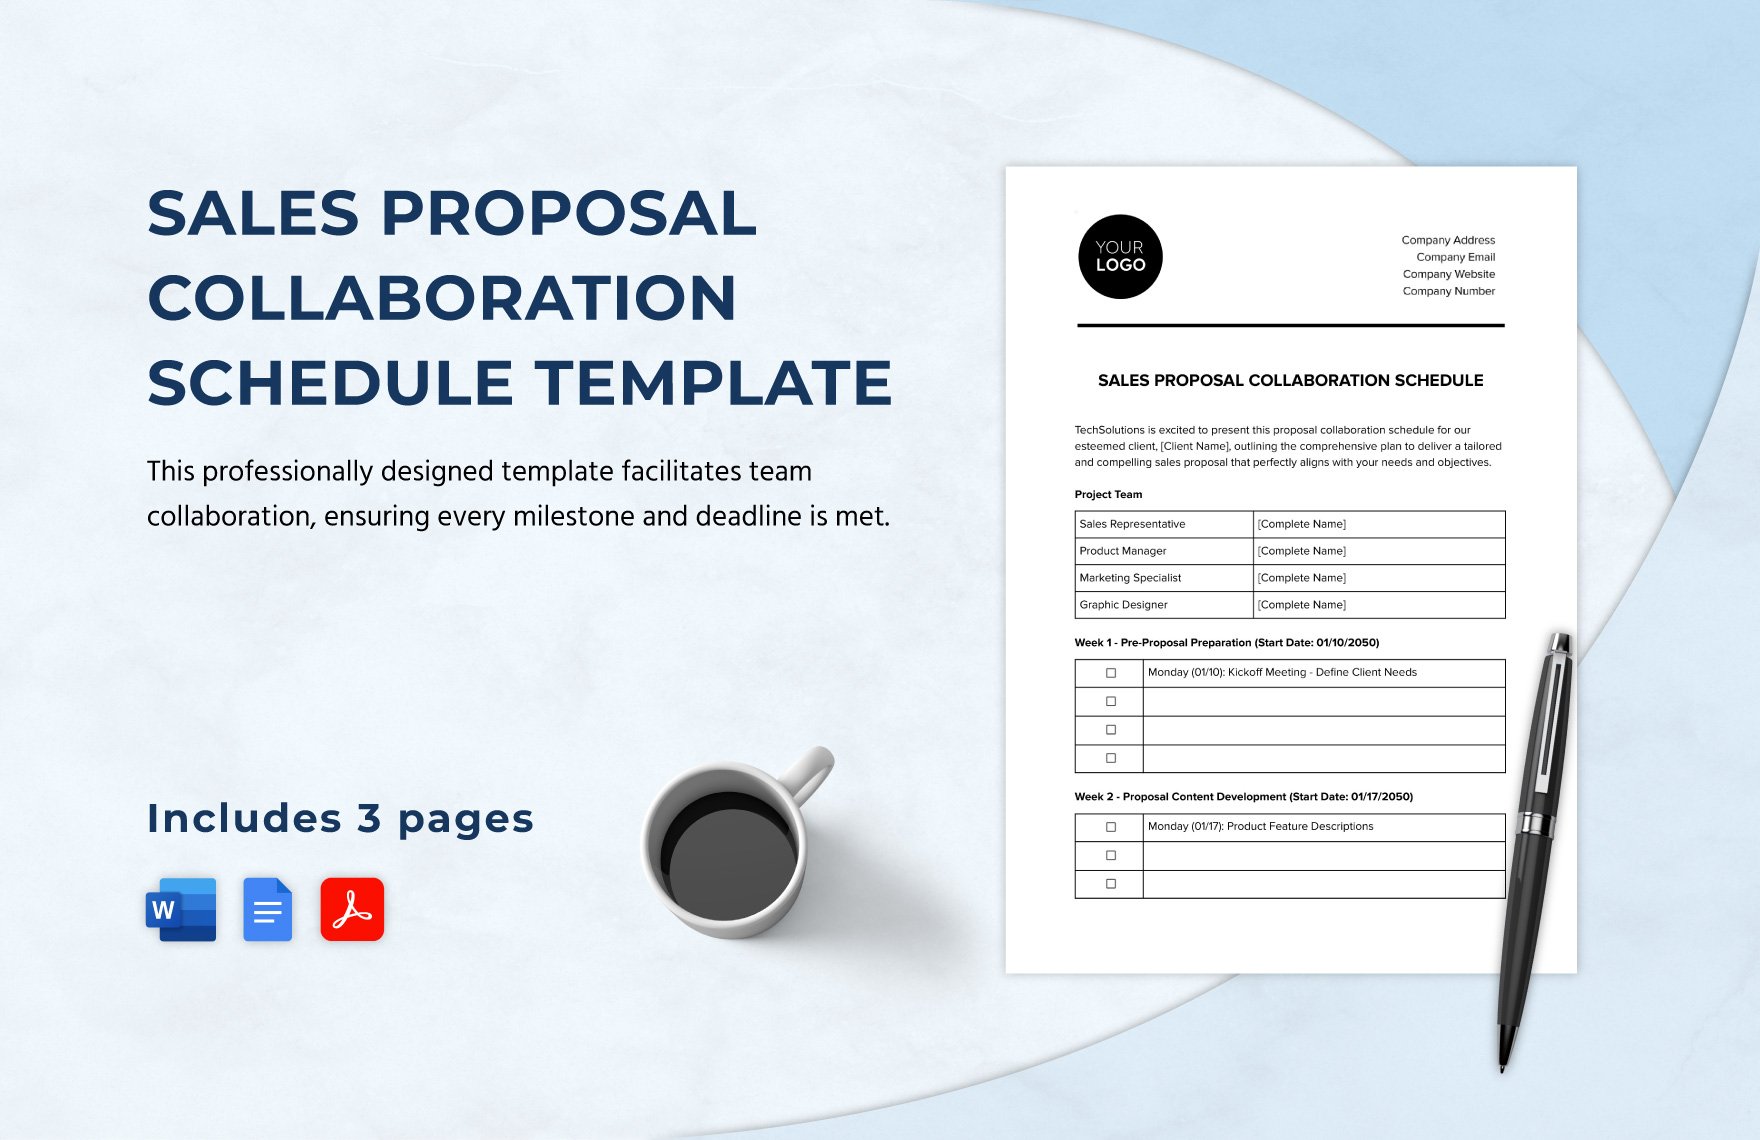 Sales Proposal Collaboration Schedule Template in Word, Google Docs, PDF